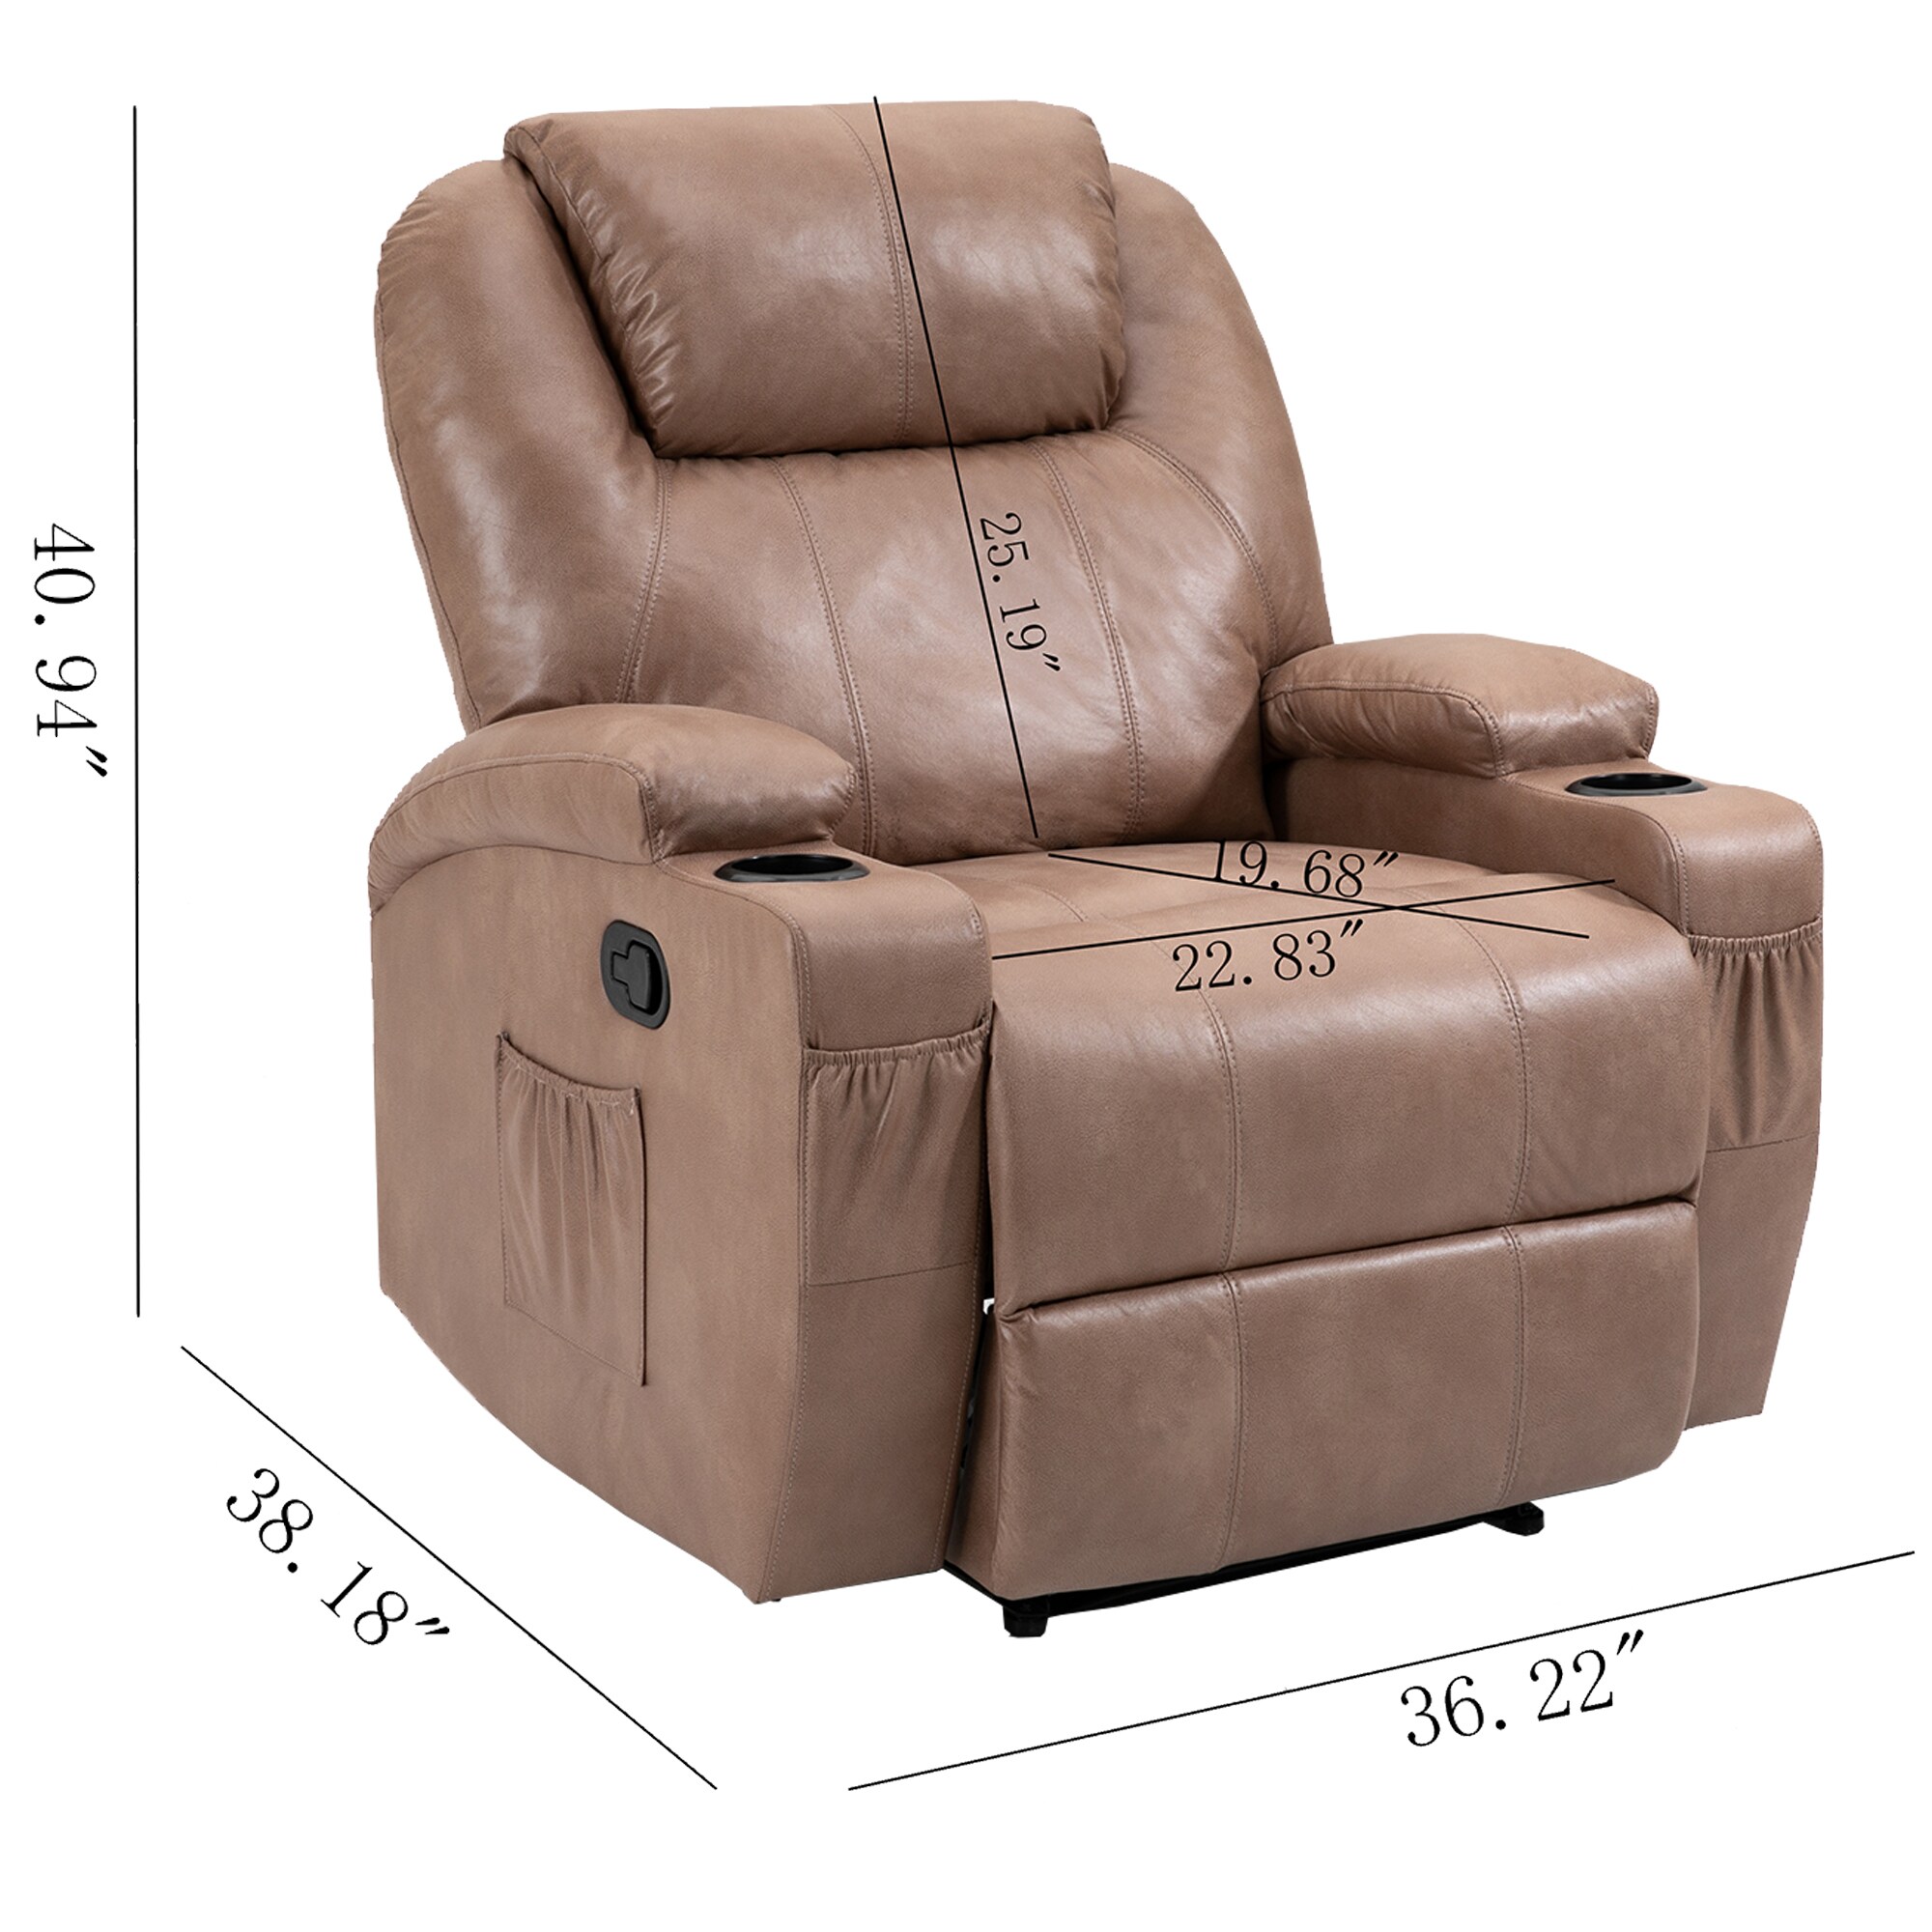 Furniture of America Grants 69.5 in. Light Brown Leather 2-Seater Power Recliner Loveseat, Light Brown Without Care Kit